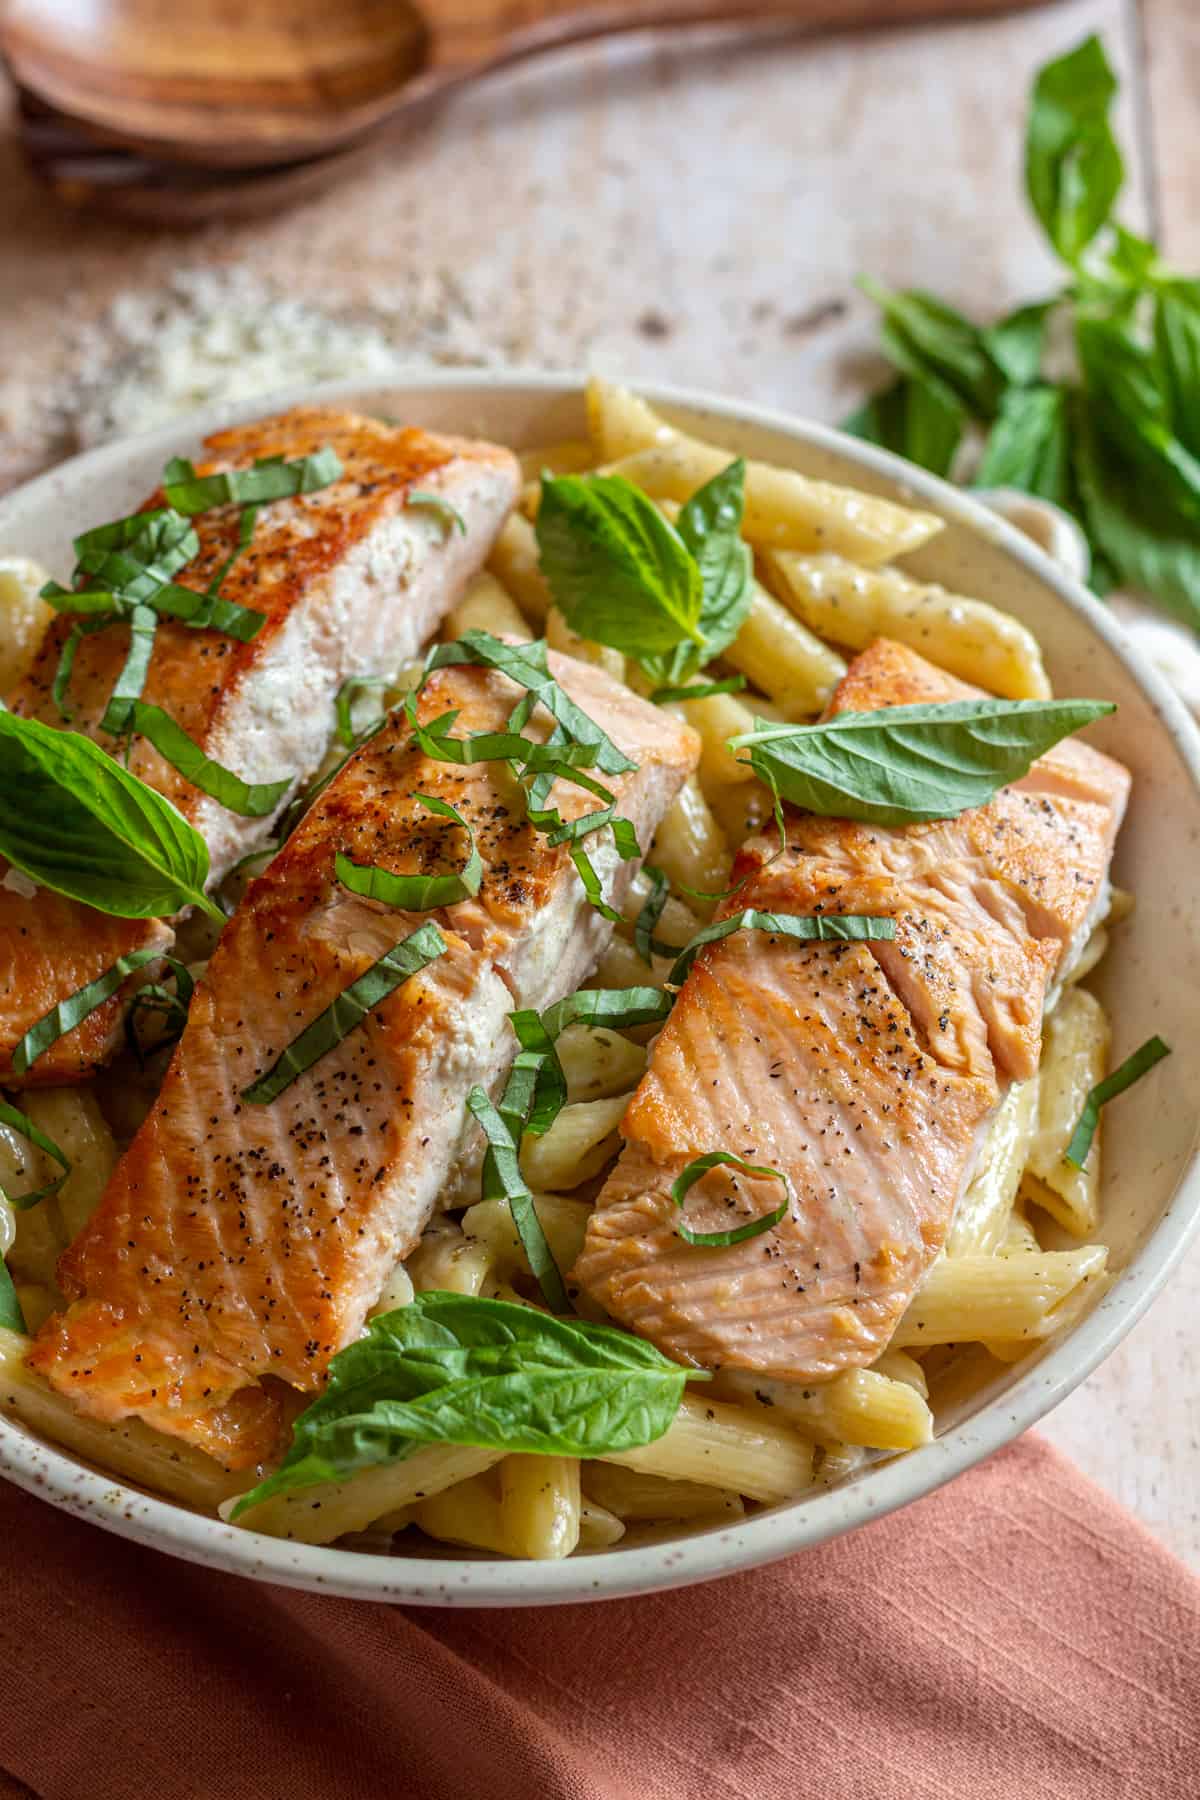 Three seared salmon filets over a bowl of penne-al-salmone pasta, garnished with fresh basil leaves. Fresh basil, wooden spoons, and parmesan cheese can be seen in the background.